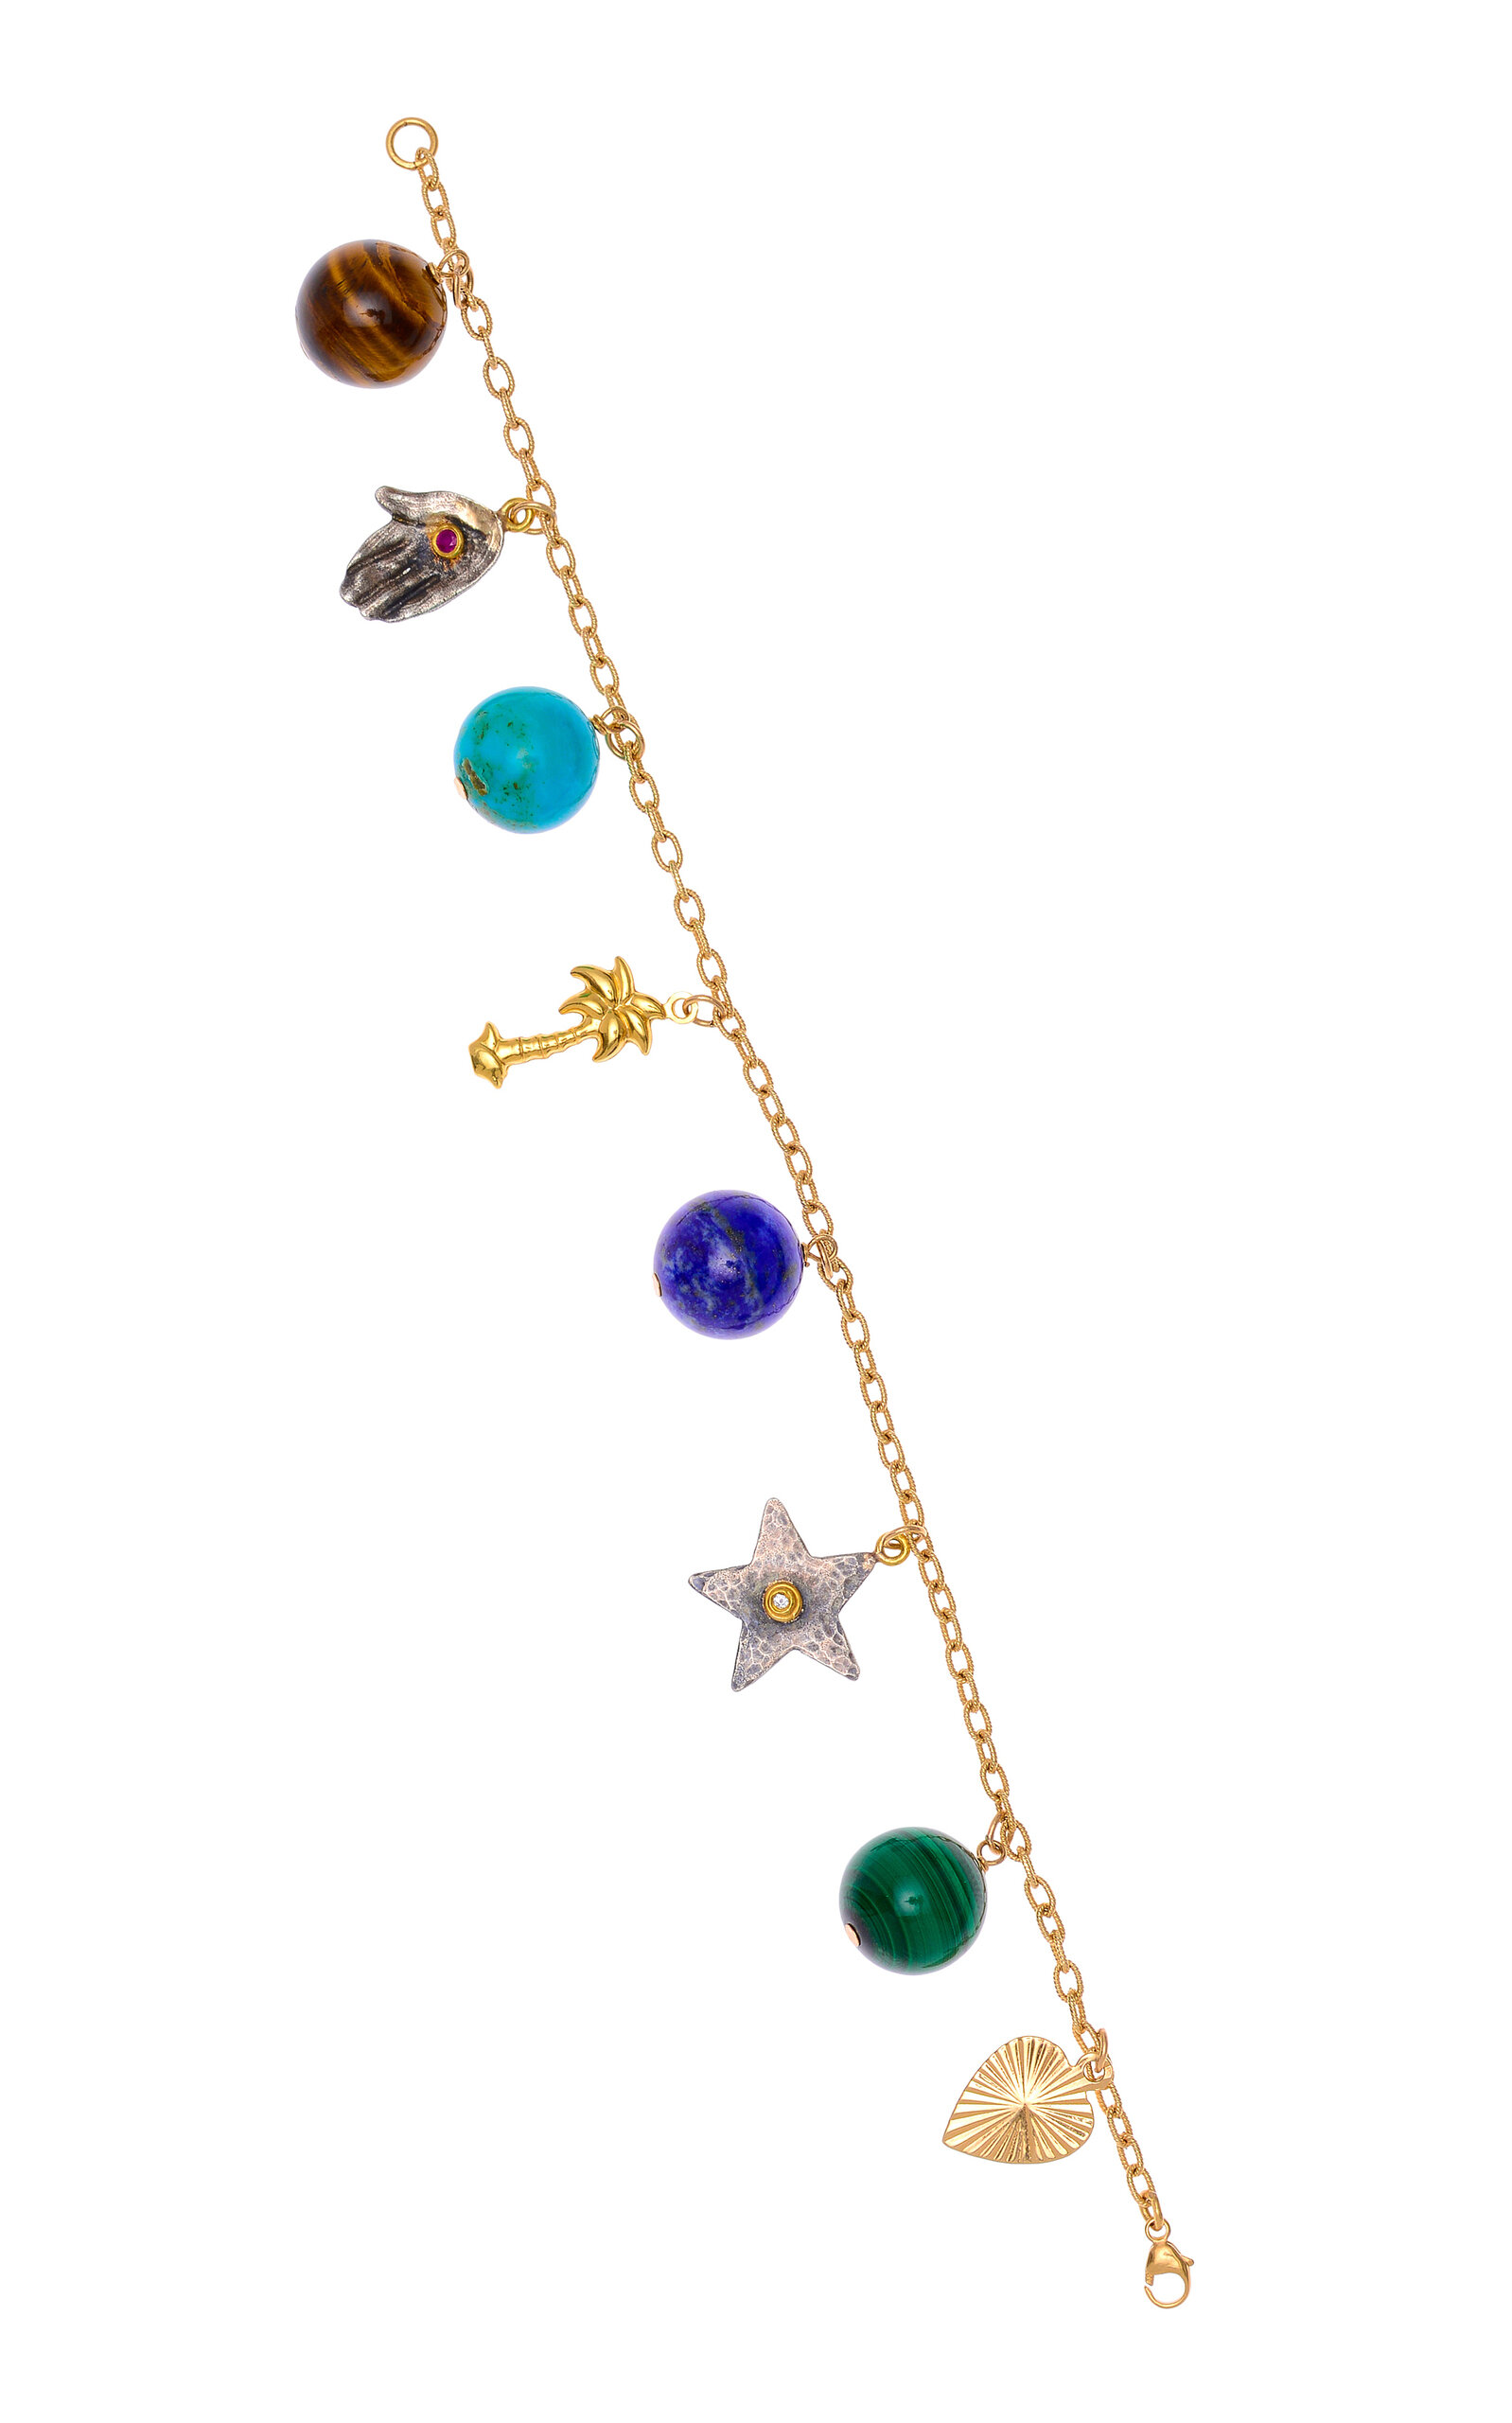 Haute Victoire 14k Yellow Gold And Sterling Silver Multi-stone Charm Bracelet